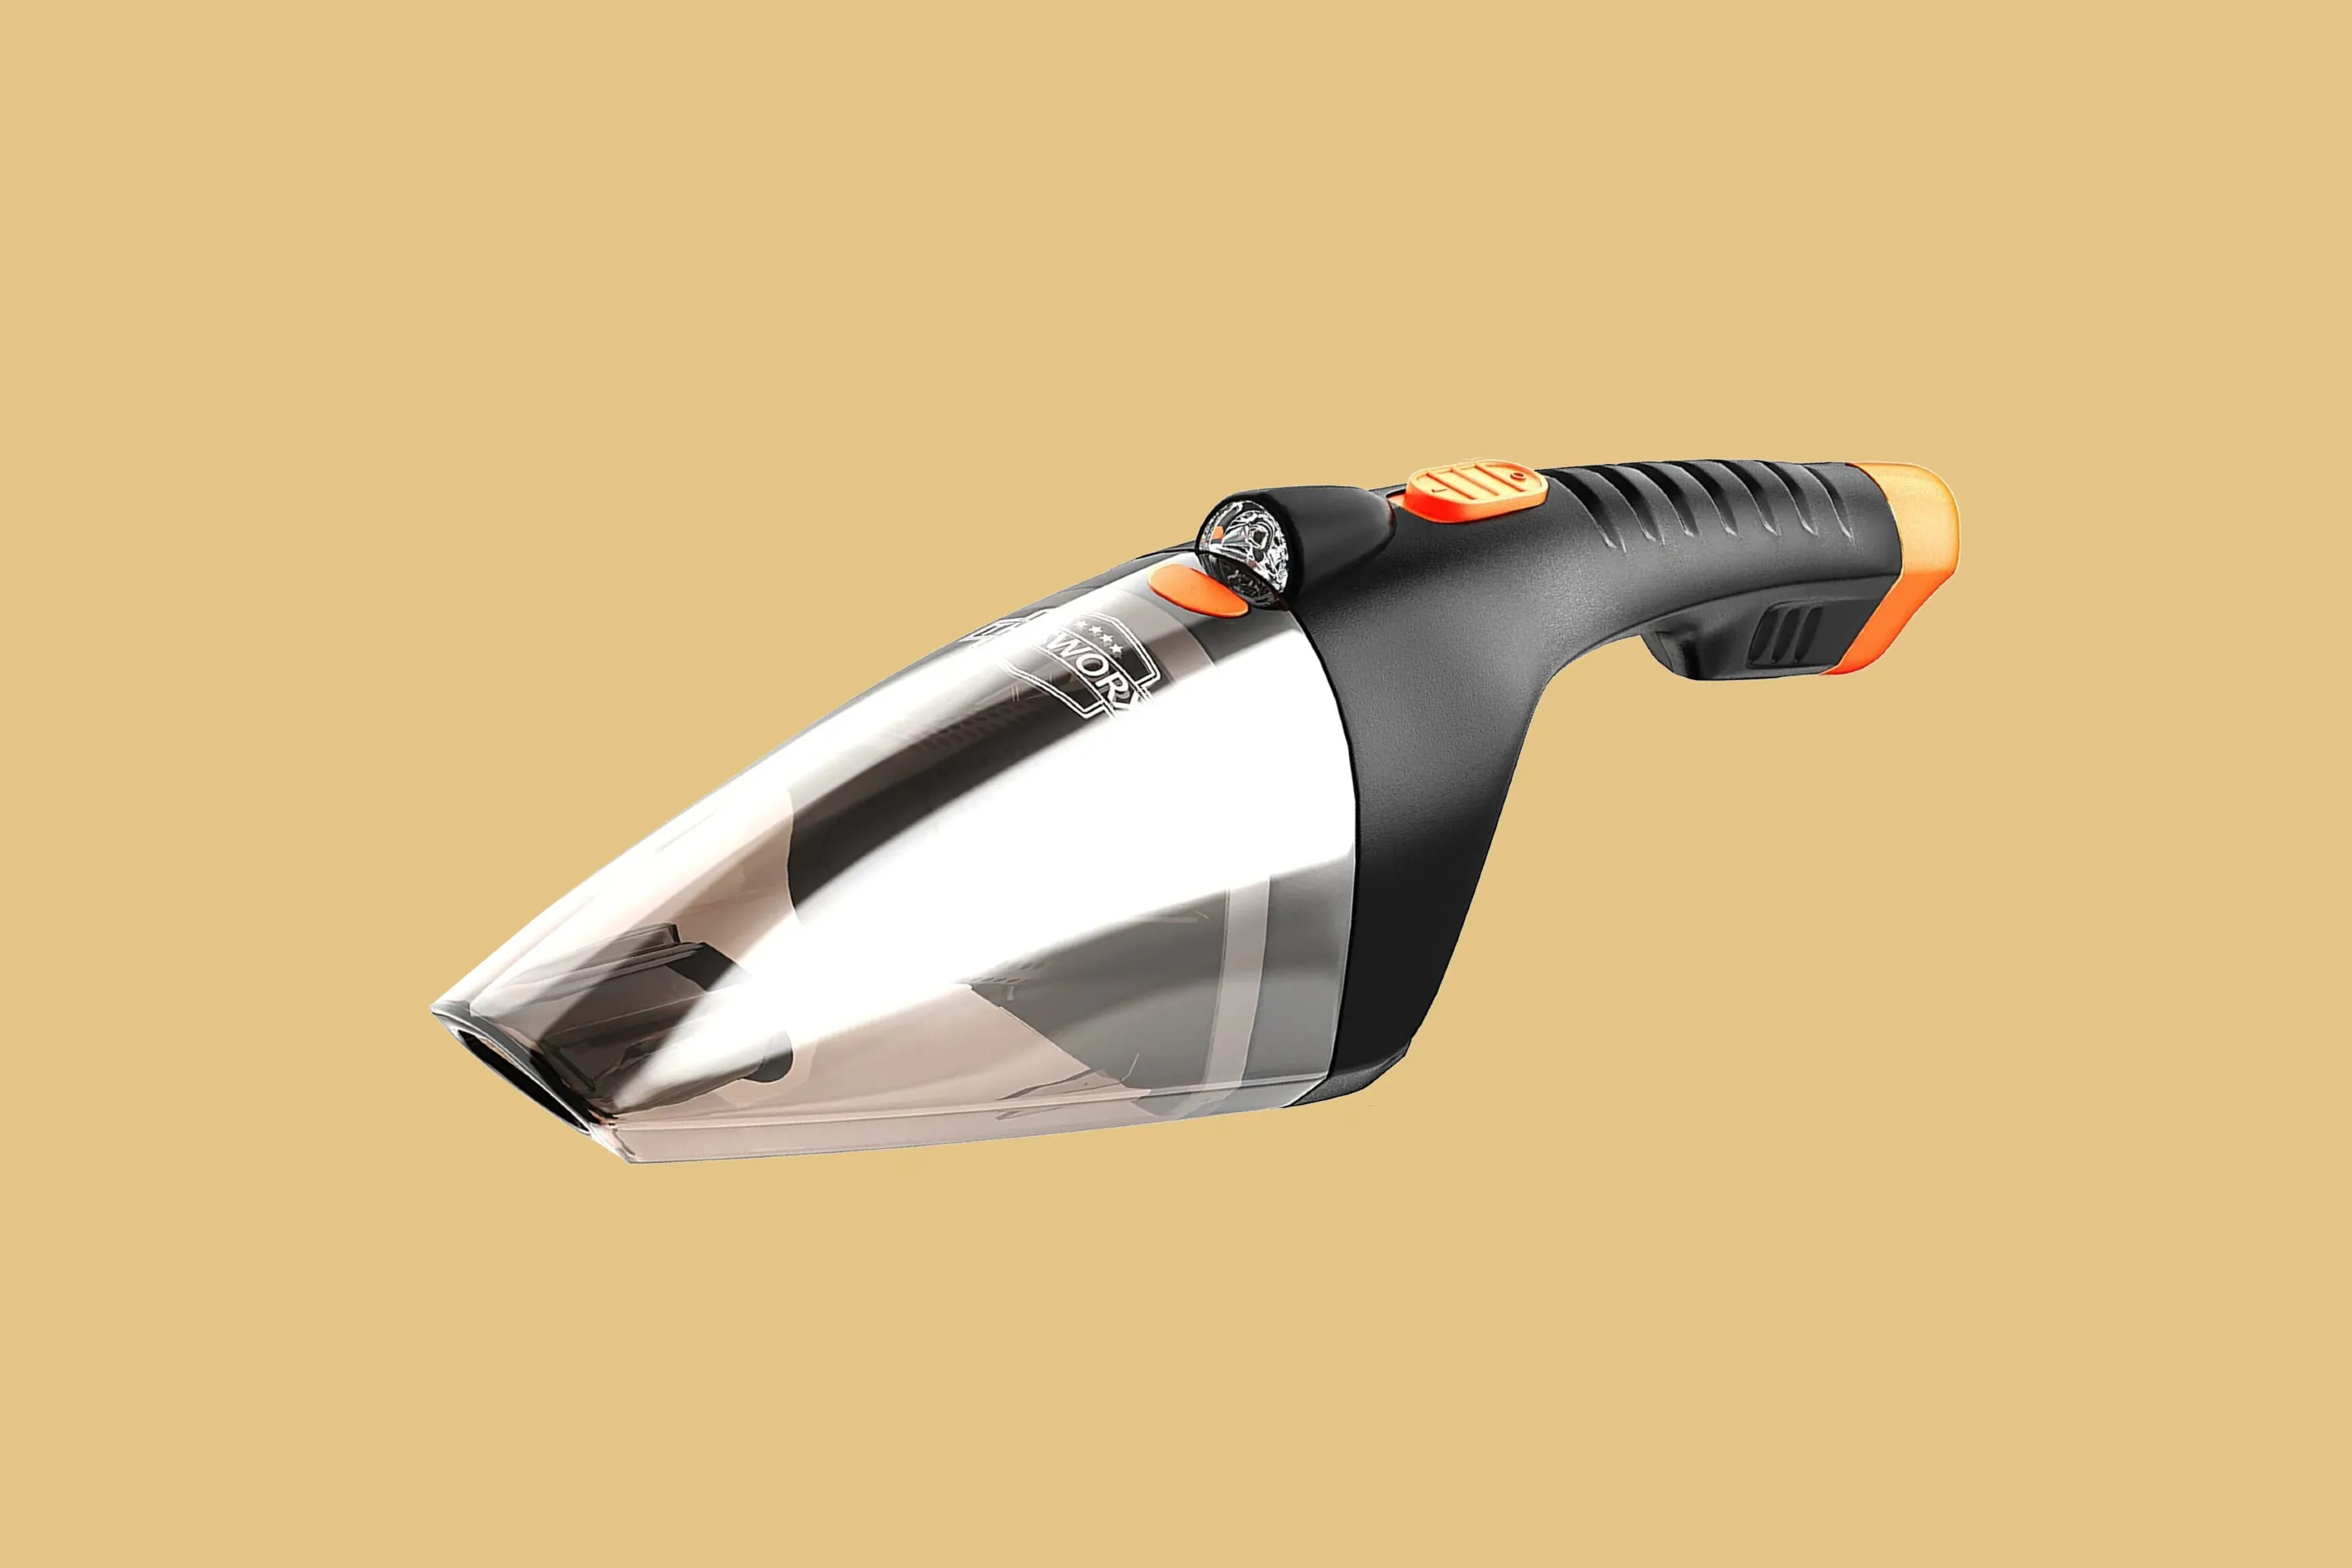 deal: Save over 50% on the ThisWorx car vacuum cleaner